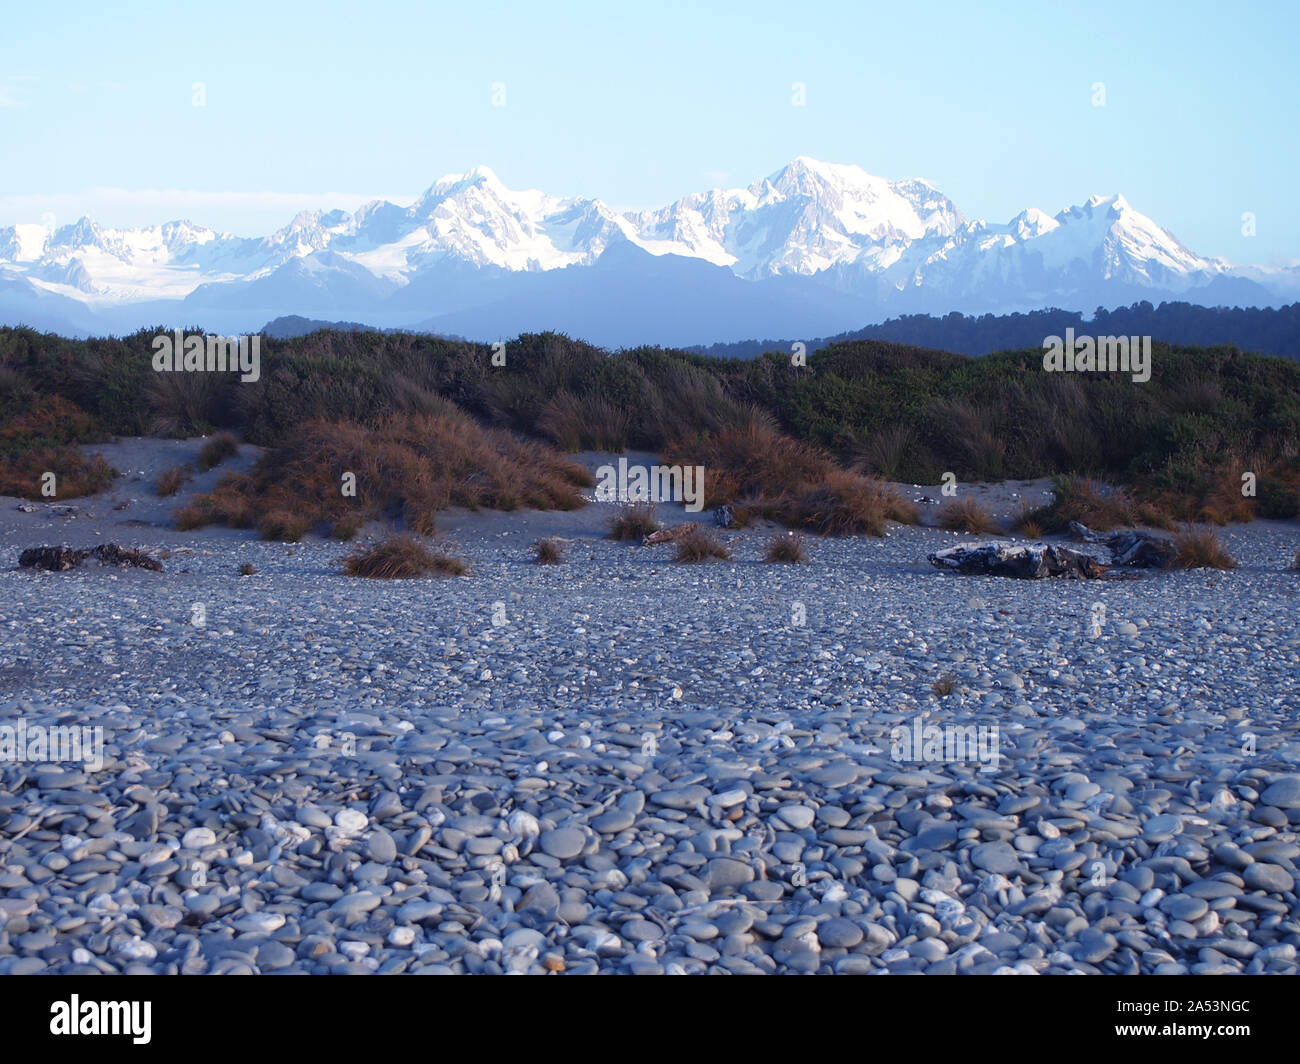 Snow-capped Southern Alps over a beach in South Island West Coast, New Zealand Stock Photo